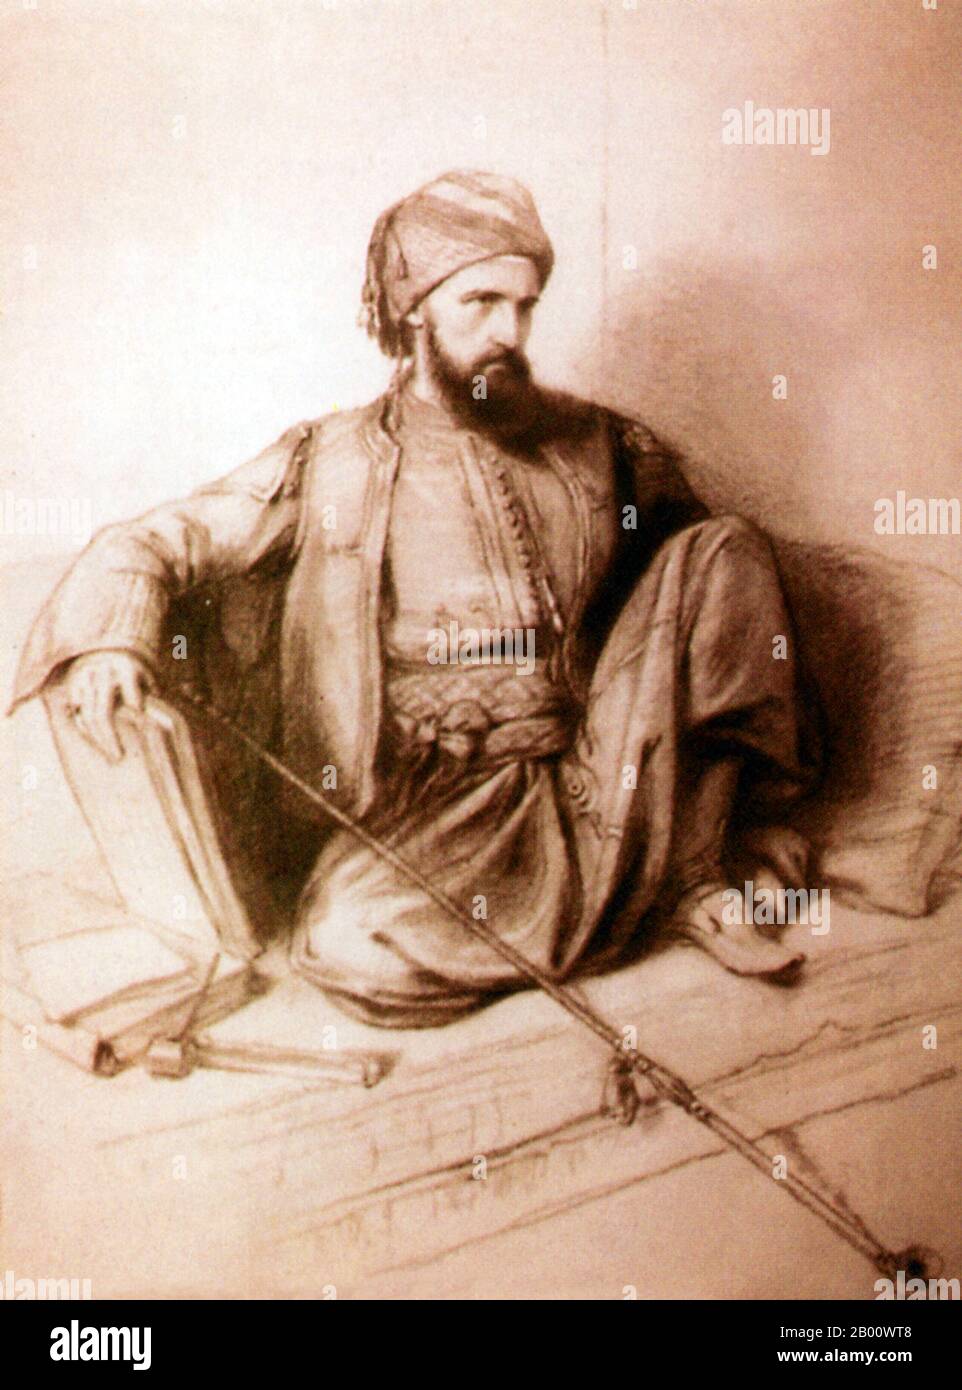 Egypt: A portrait of British scholar Edward W. Lane in traditional Ottoman Turk dress holding a pipe. Illustration by Richard James Lane (1800-1872), 1835.  Edward William Lane (1801-1876) was a British Orientalist, translator and Arabic scholar who lived in Ottoman Cairo from 1825-28. So fascinated was he with Egypt, he dressed as an Ottoman Turk and spent much time sketching the backstreets of Cairo. Upon his return to England he translated the novel ‘Arabian Nights’ [‘1001 nights’] and ‘Selections from the Qur’an’. Stock Photo